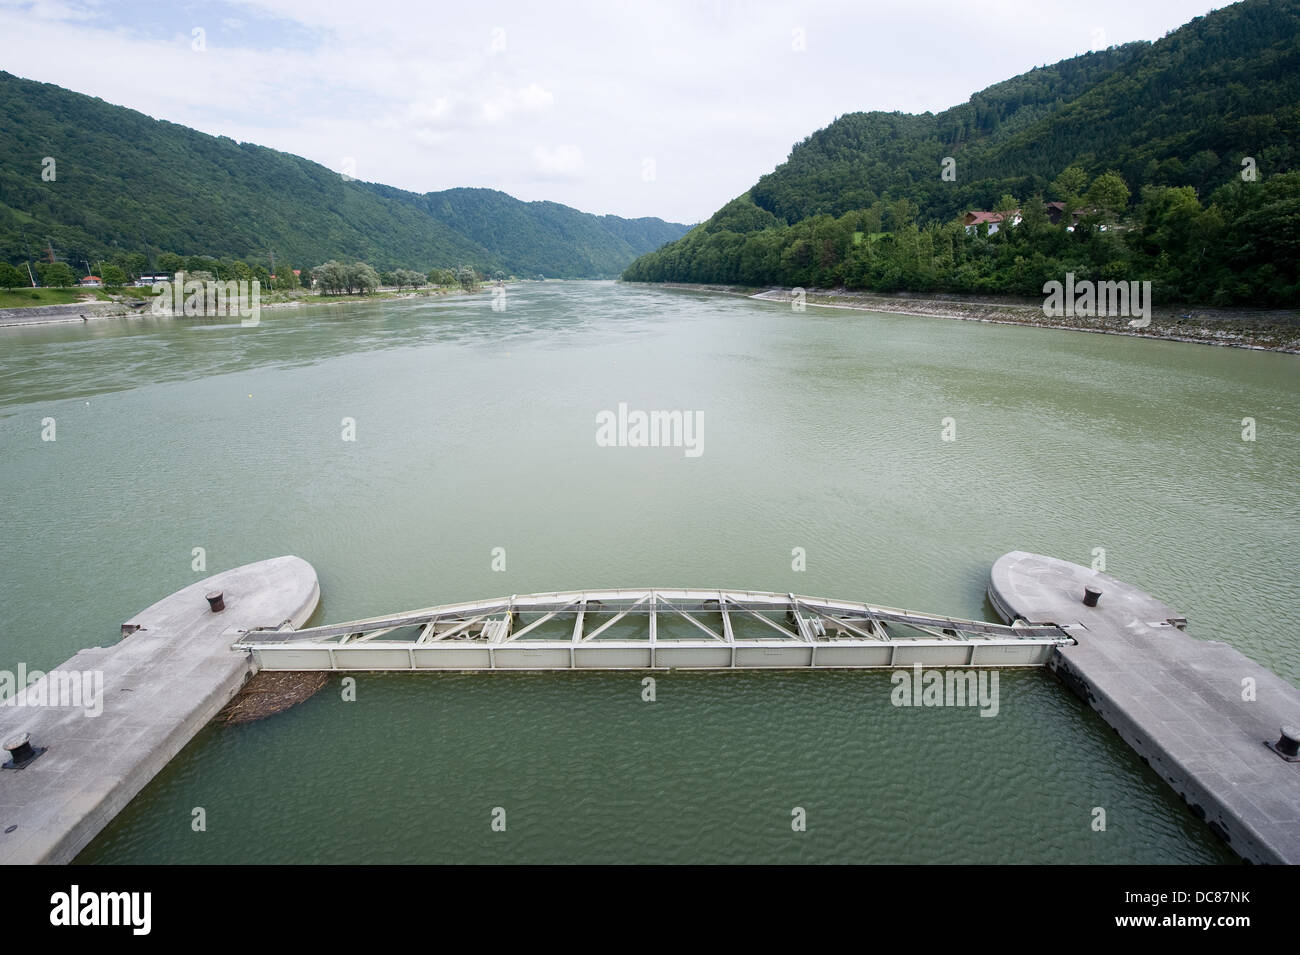 Part of the hydro-electric power station Jochenstein in the Donau river on the border of Germany with Austria Stock Photo